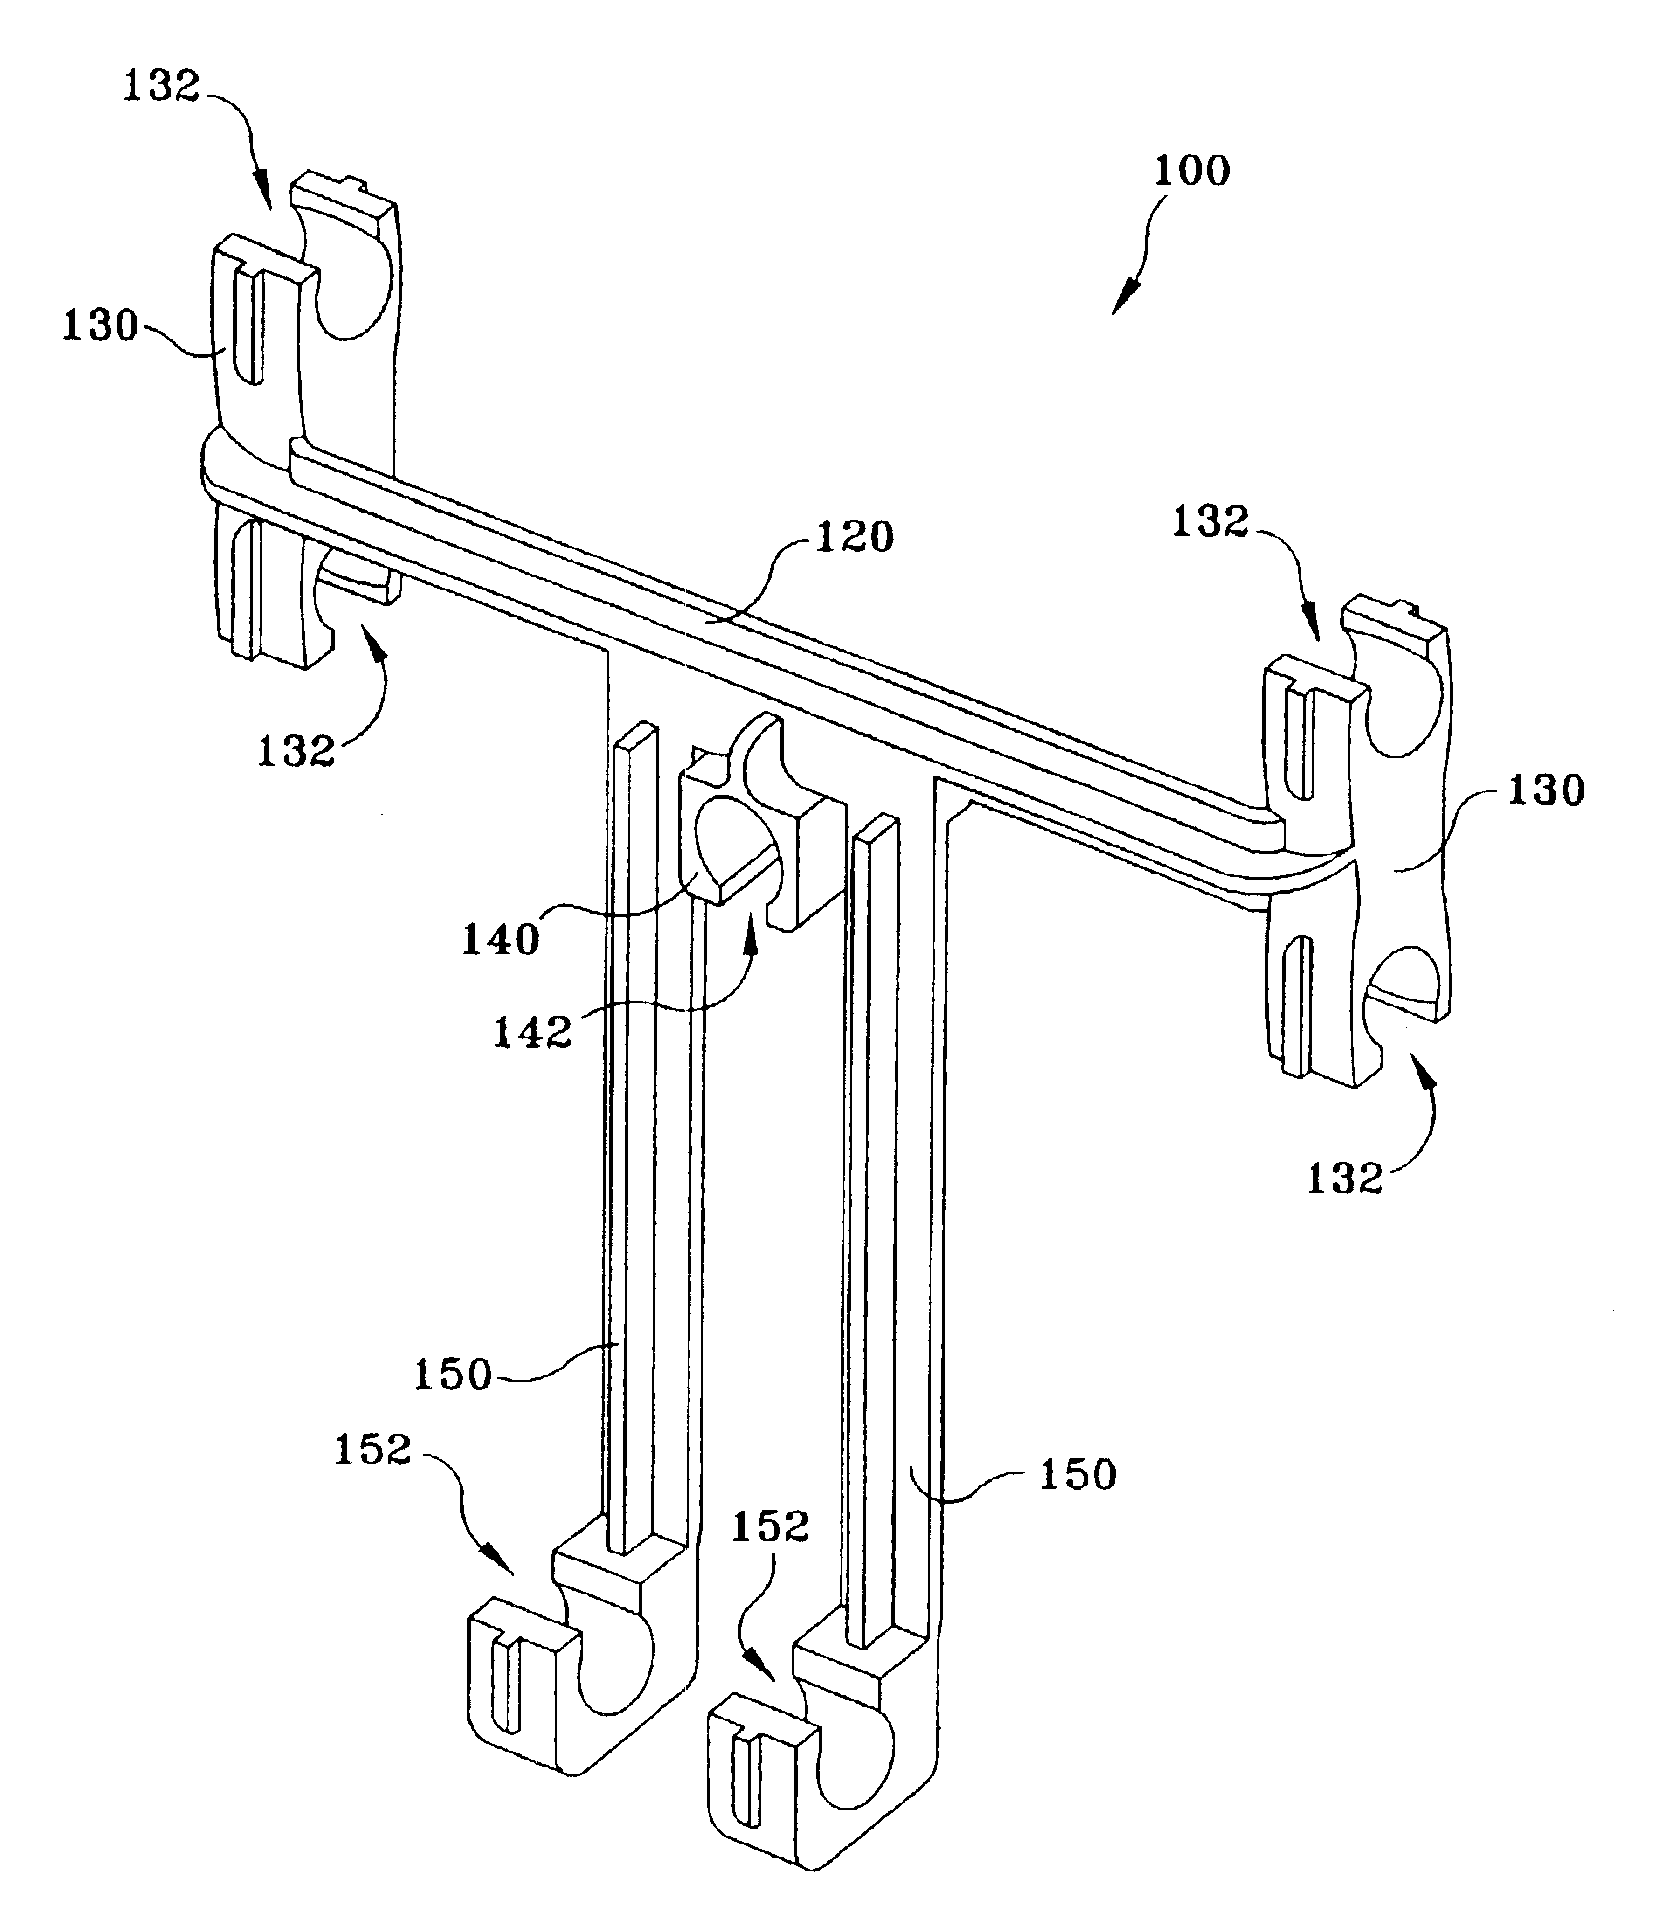 Apparatus and method for reinforcing concrete using rebar supports